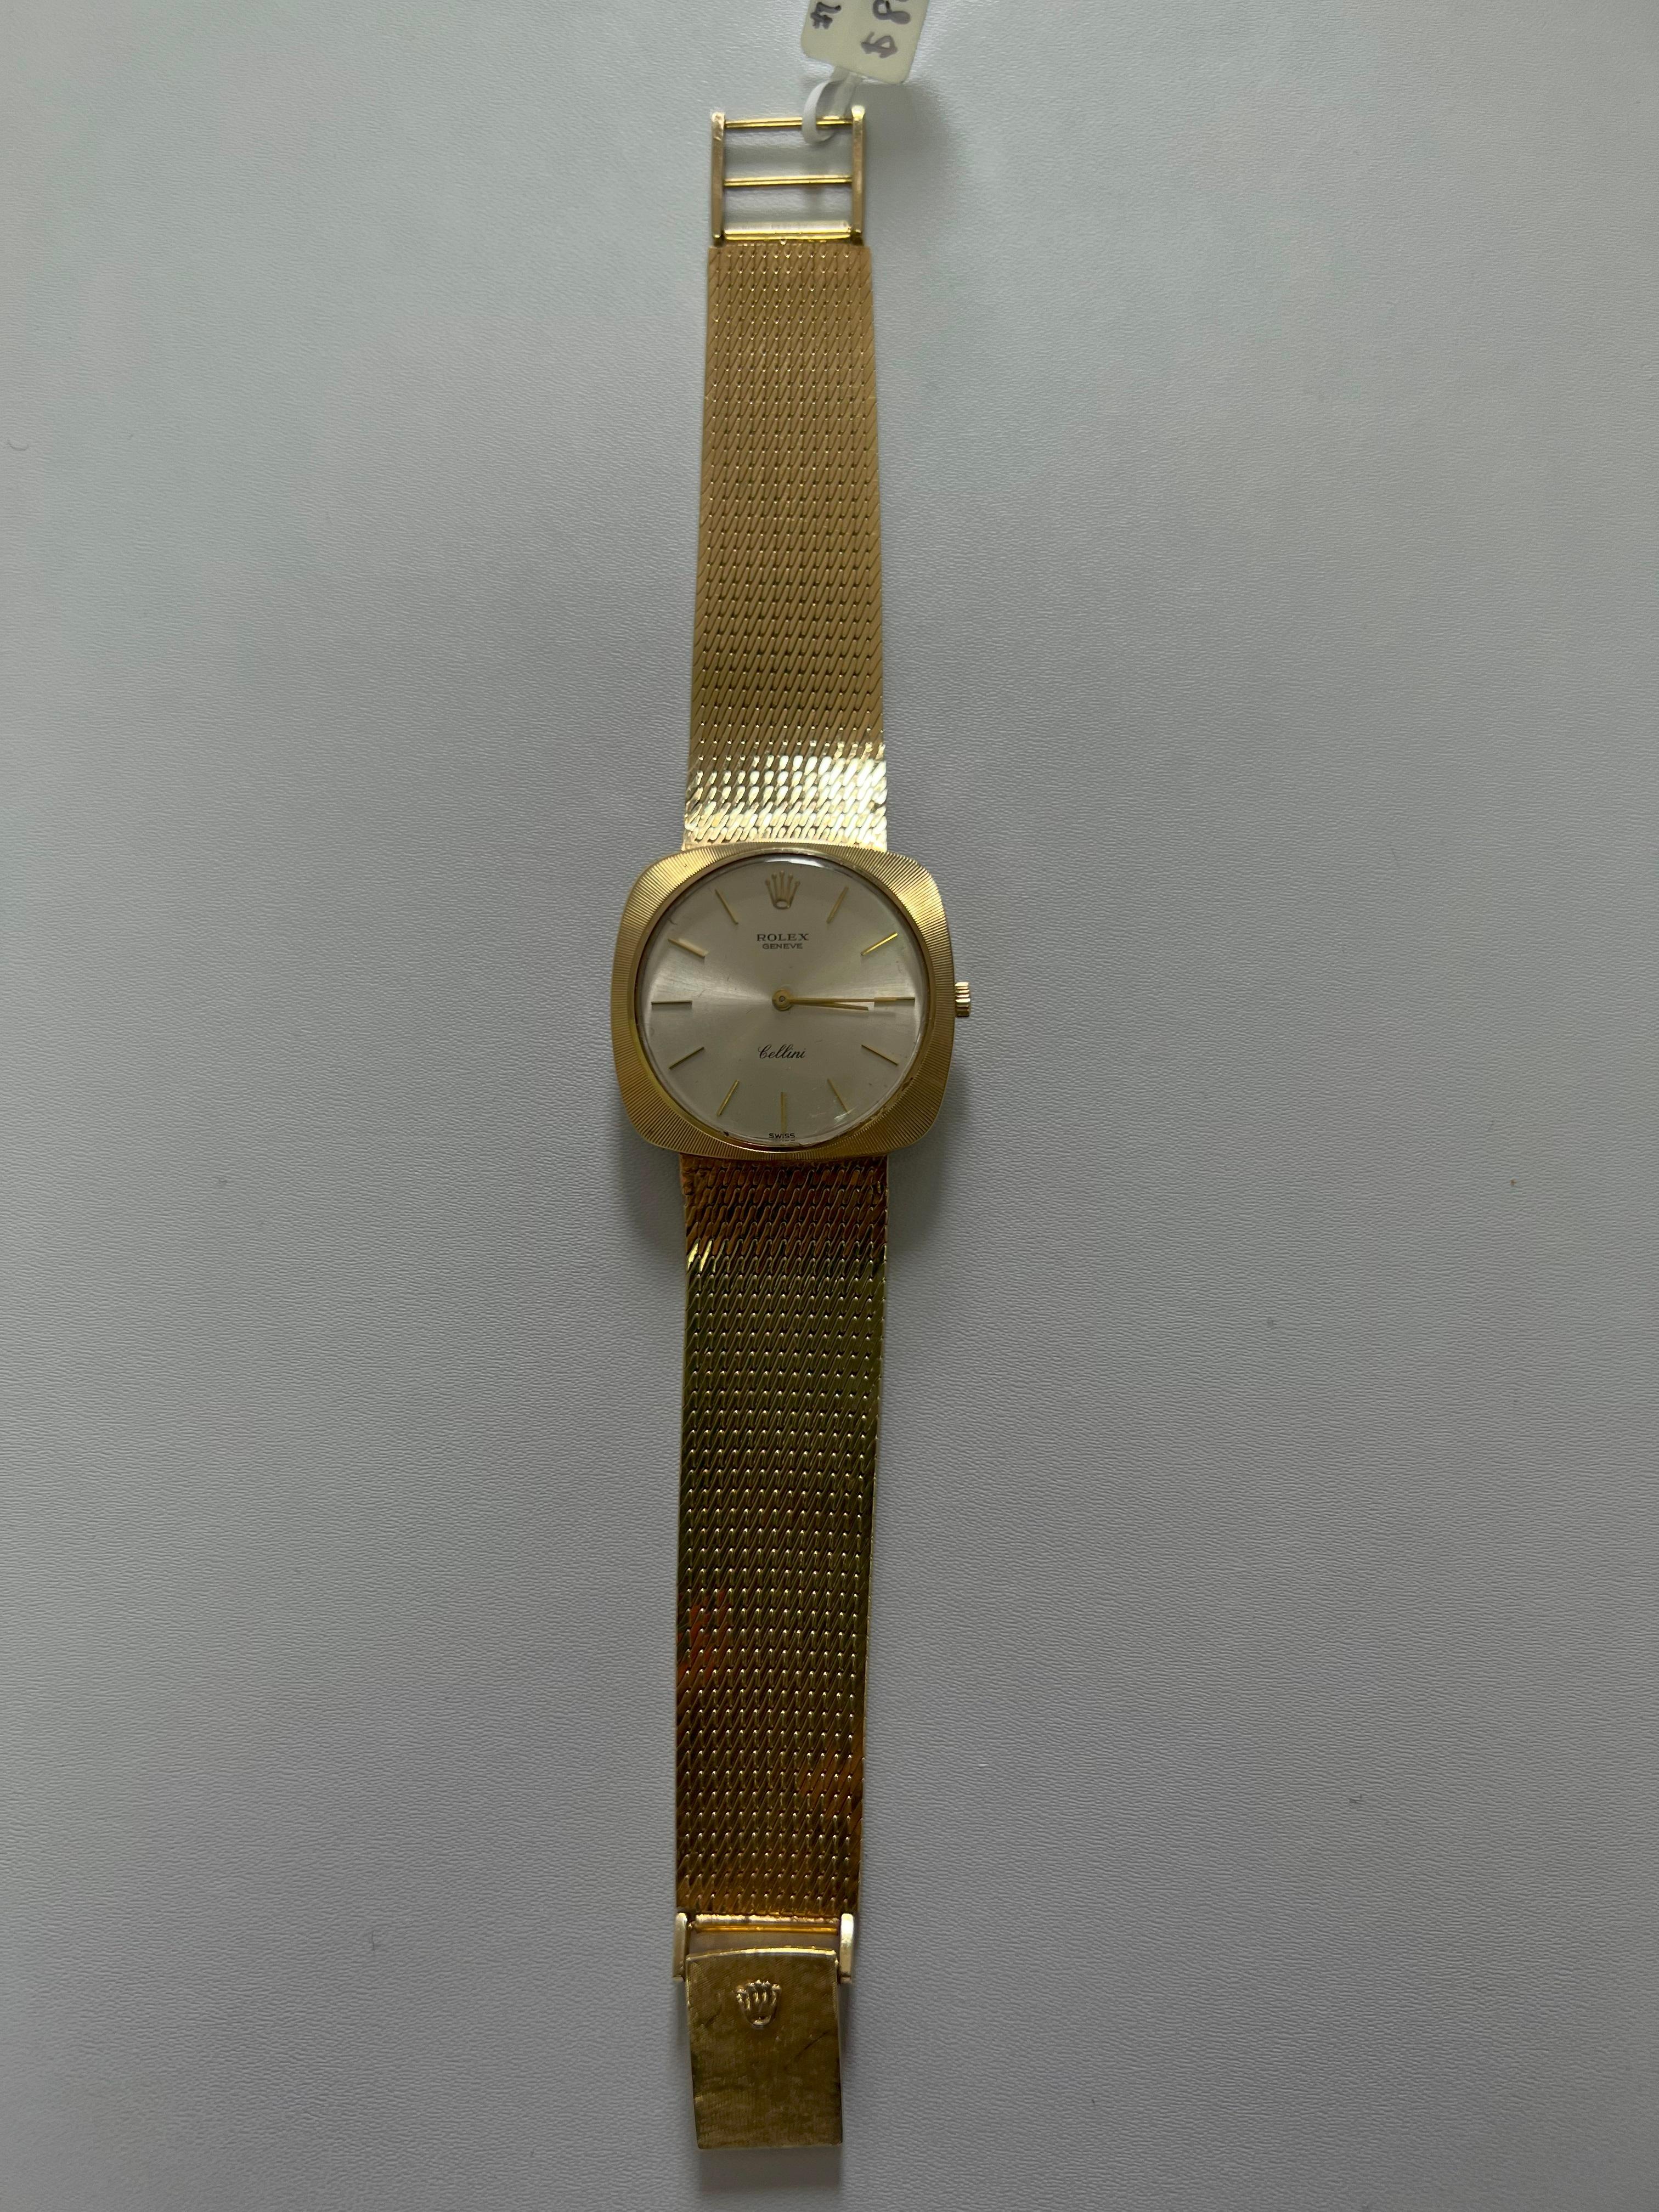 Rolex Cellini White Round Cushion Dial 14 Karat Yellow Gold Vintage Watch  In Good Condition For Sale In Oakton, VA